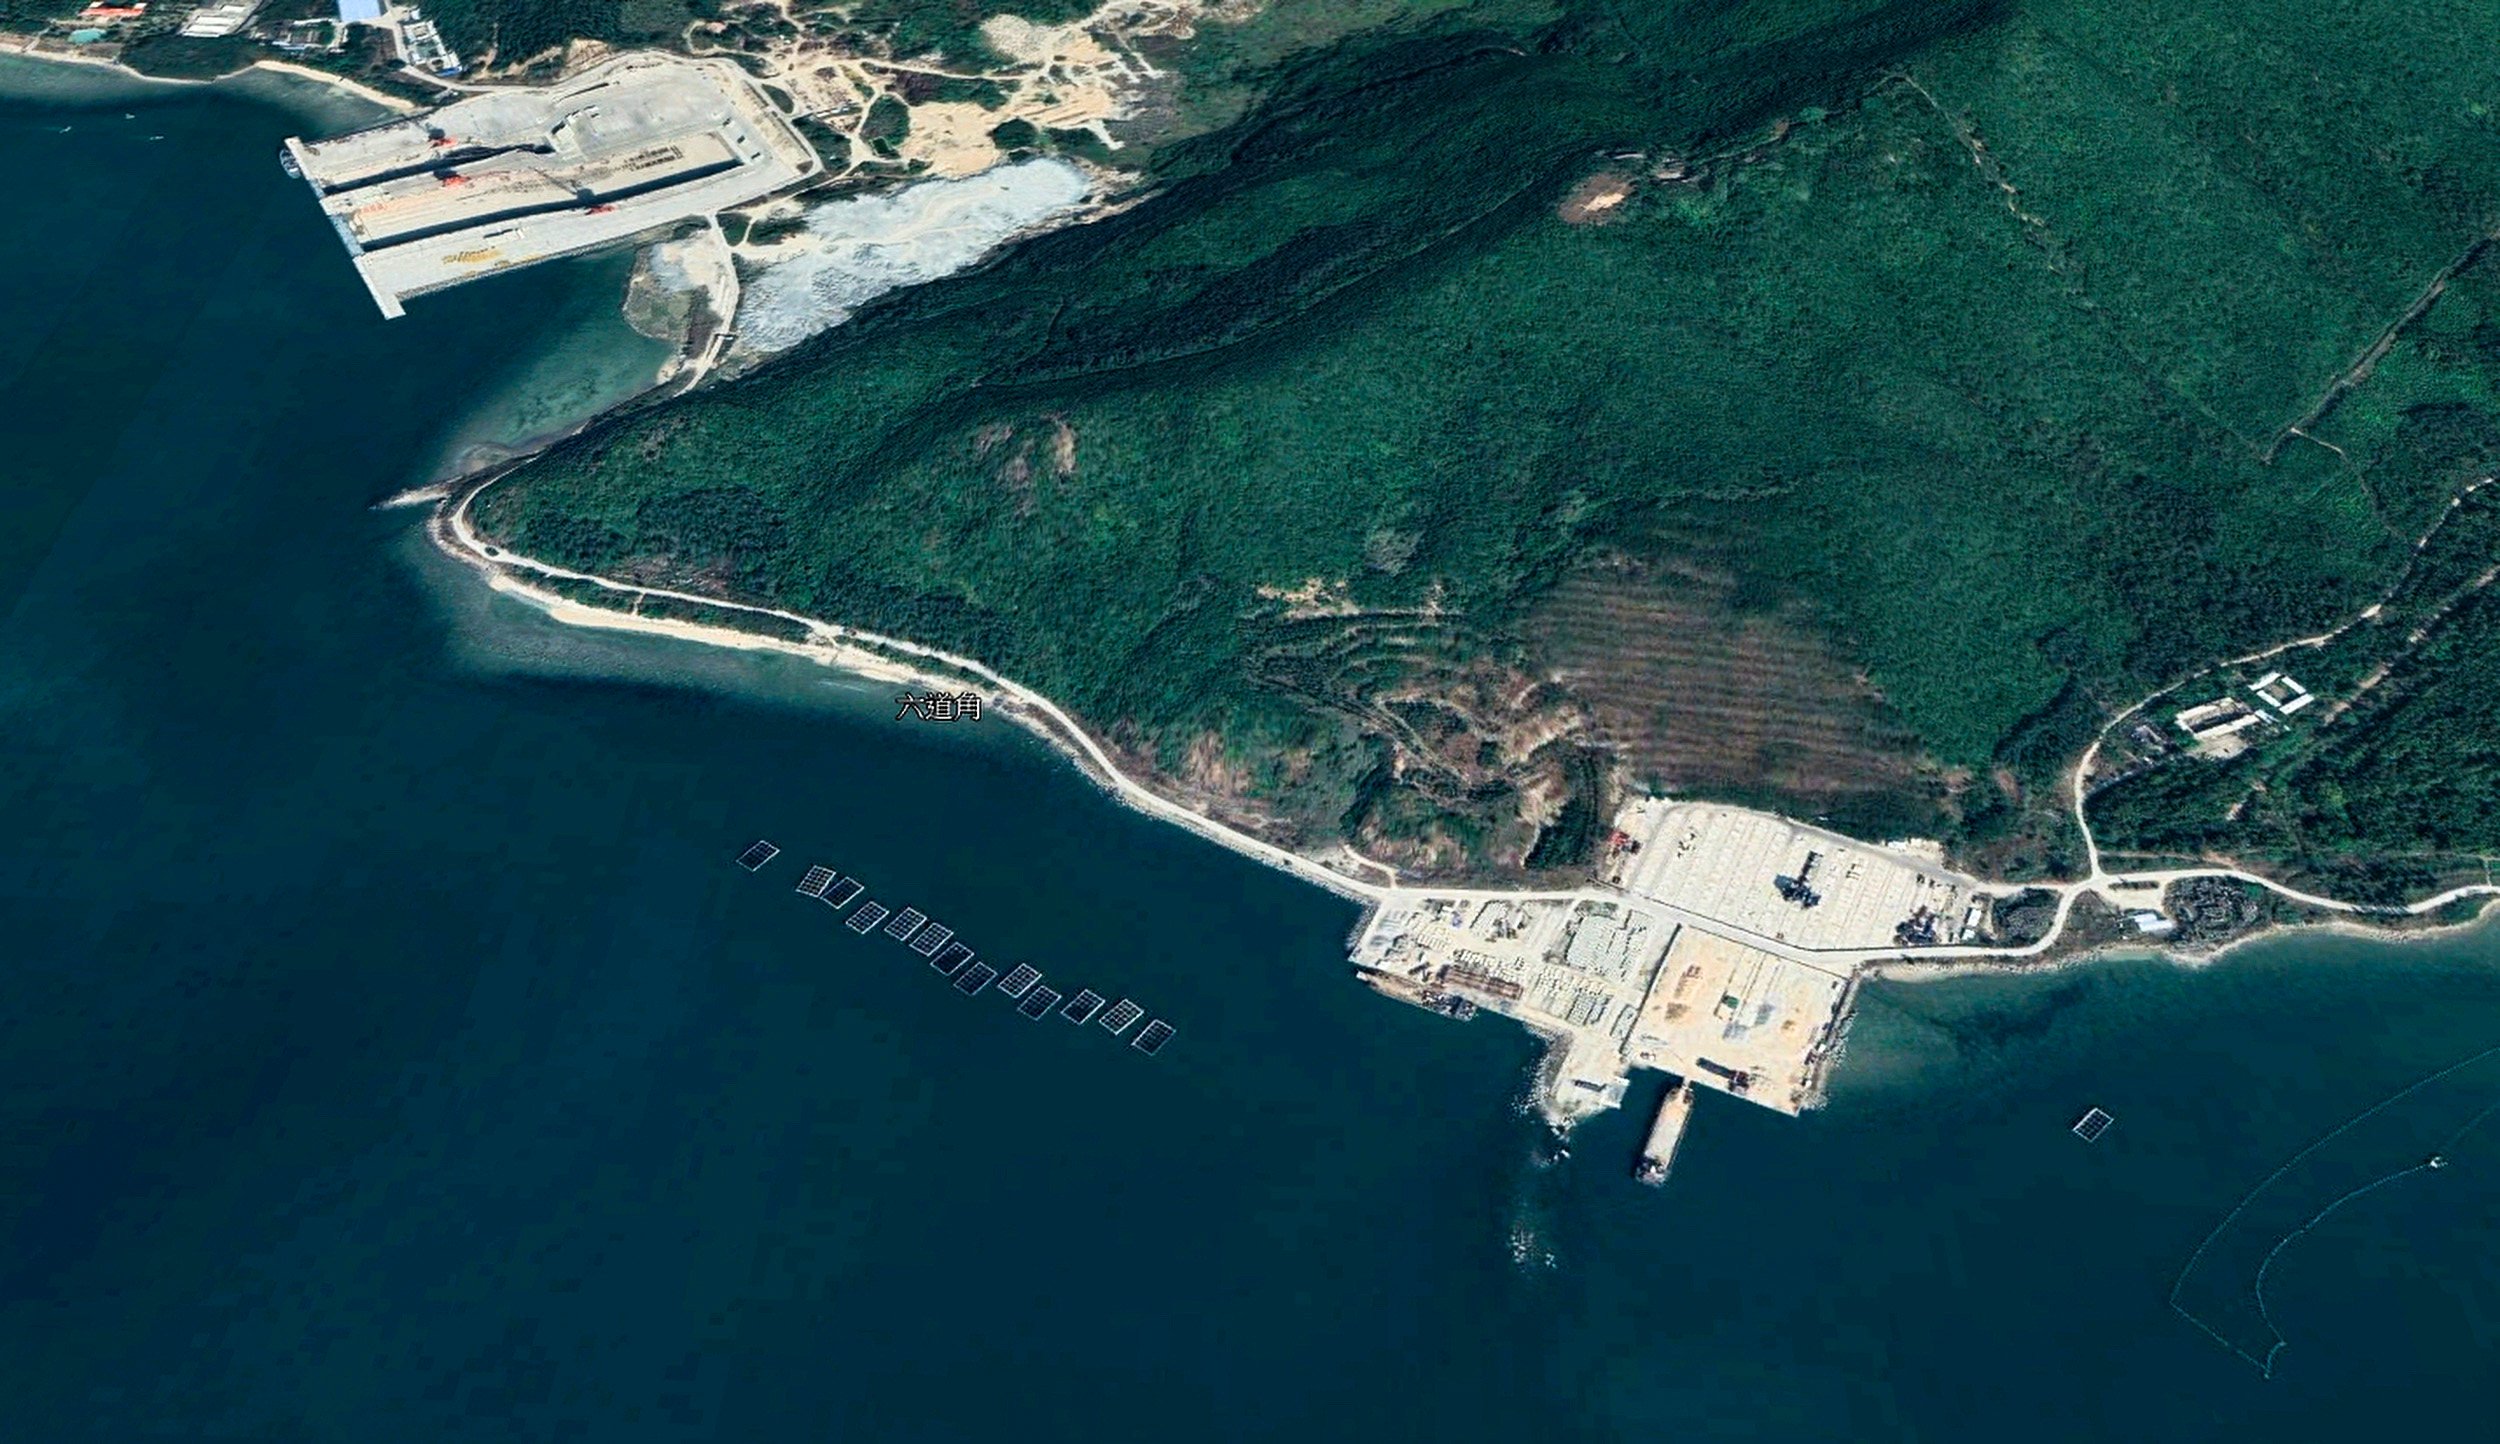 Satellite imagery of the Yulin naval base at Sanya in southern China shows new construction and expansion projects have started in the past year. Source: Google Earth